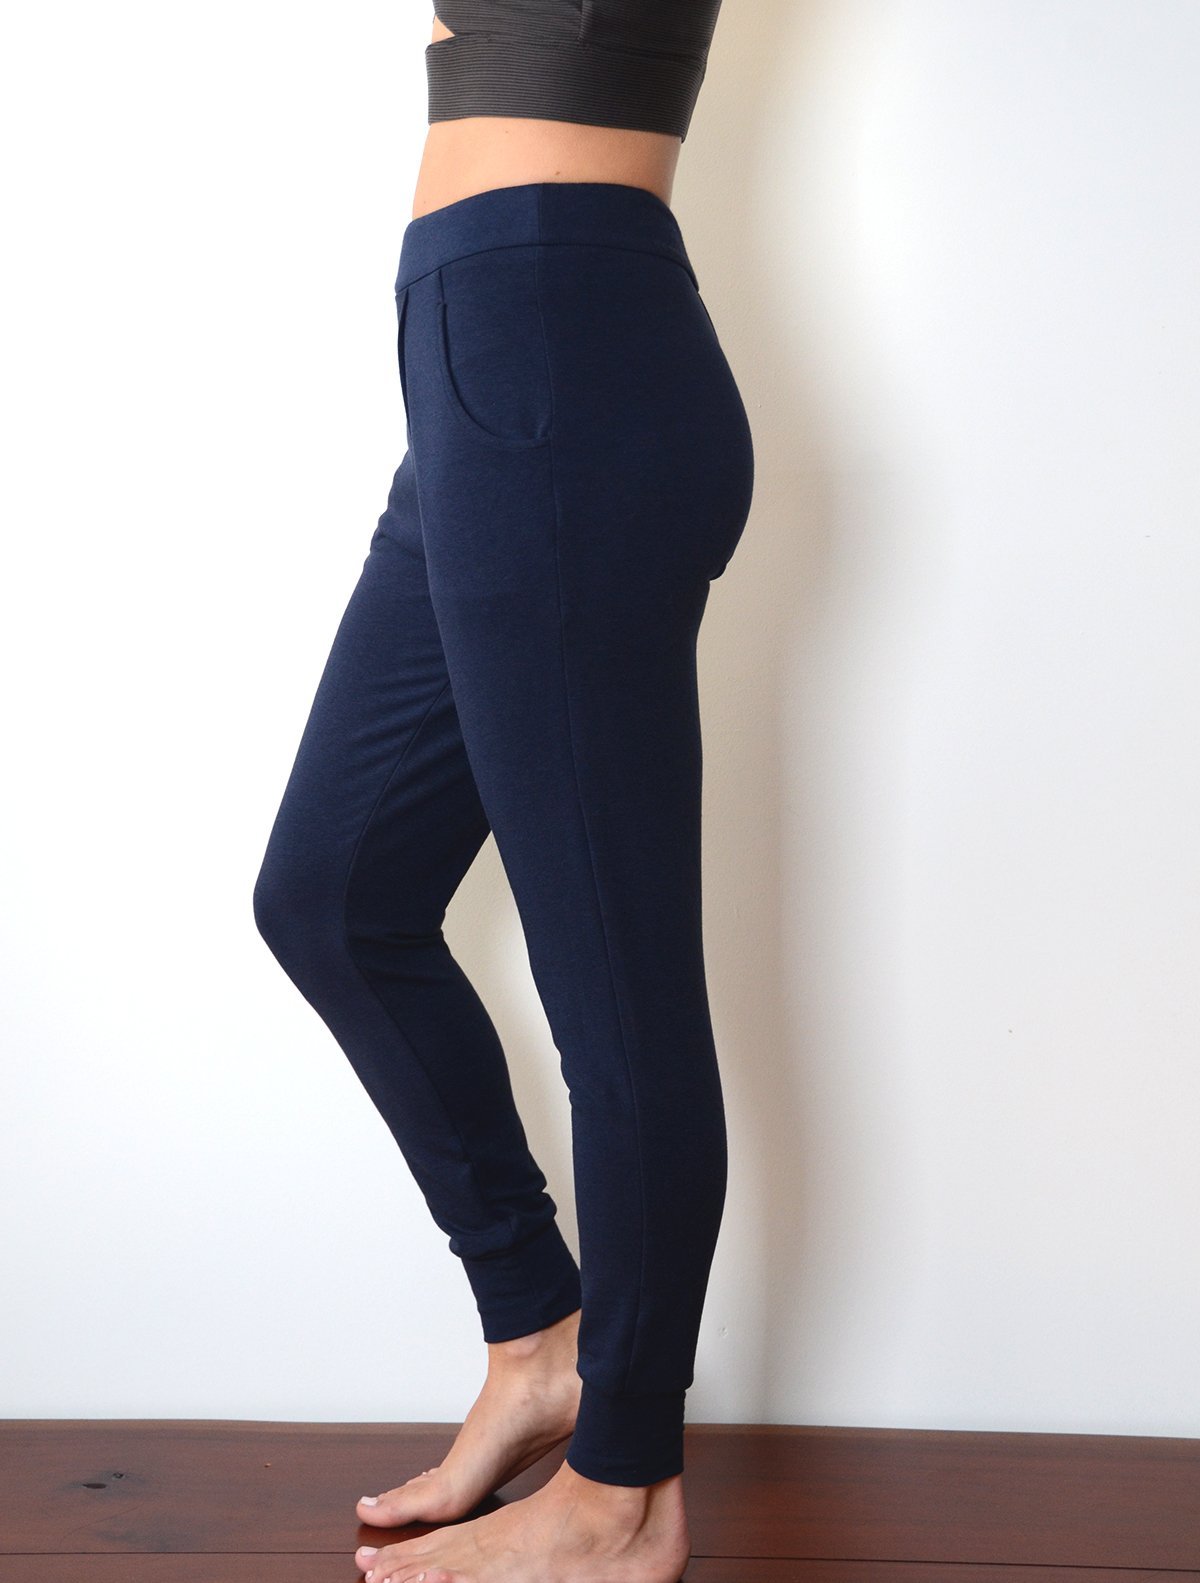 left side view of model wearing simulacra's navy blue french terry trouser pants with pockets